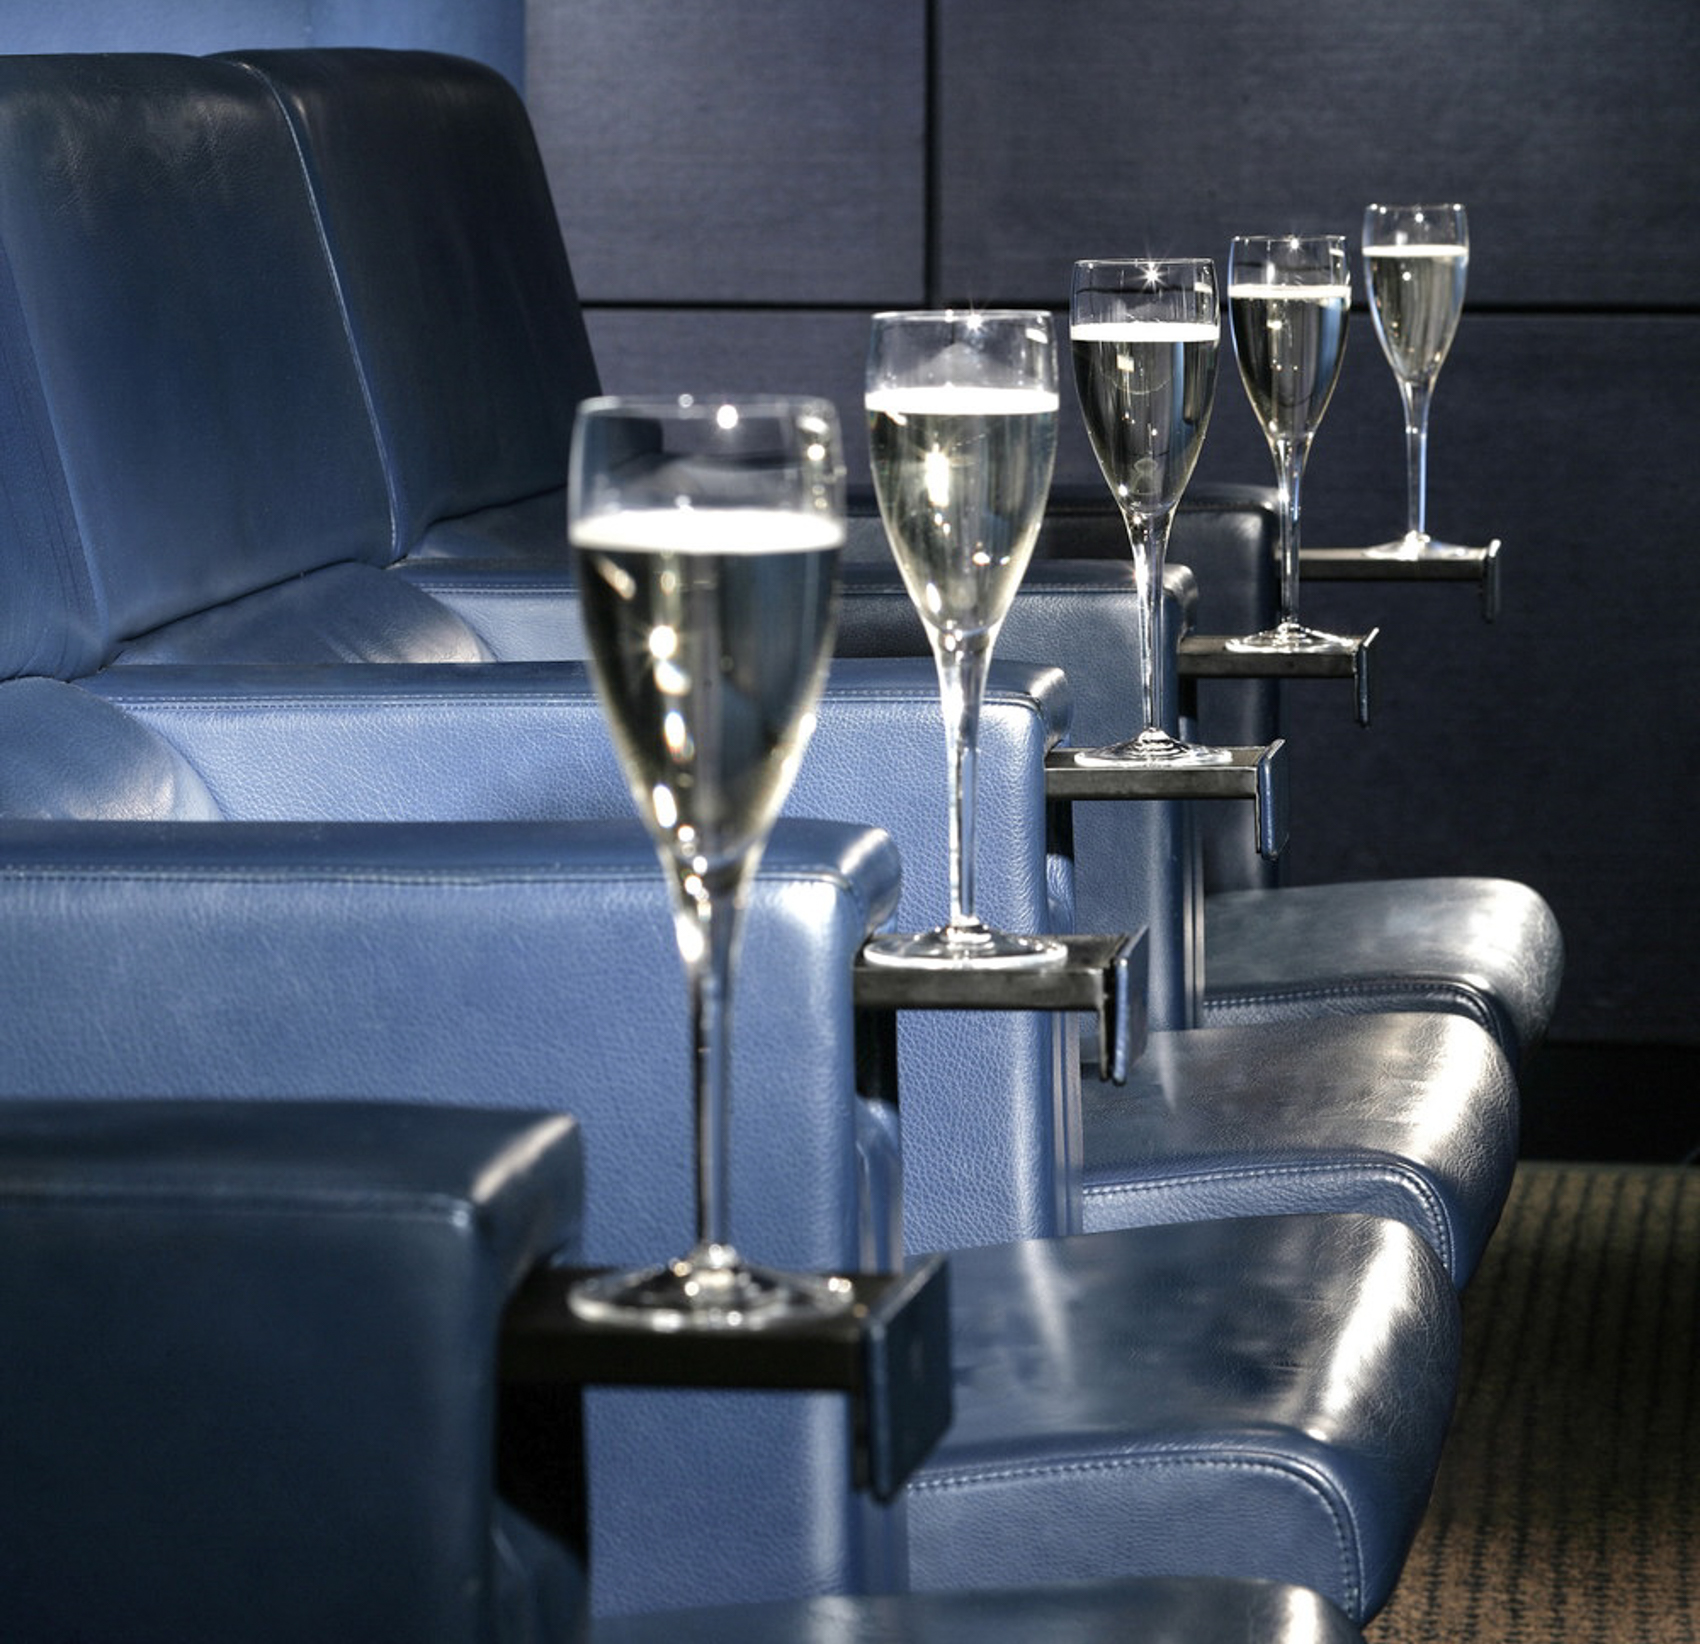 The screening room at One Aldwych, London